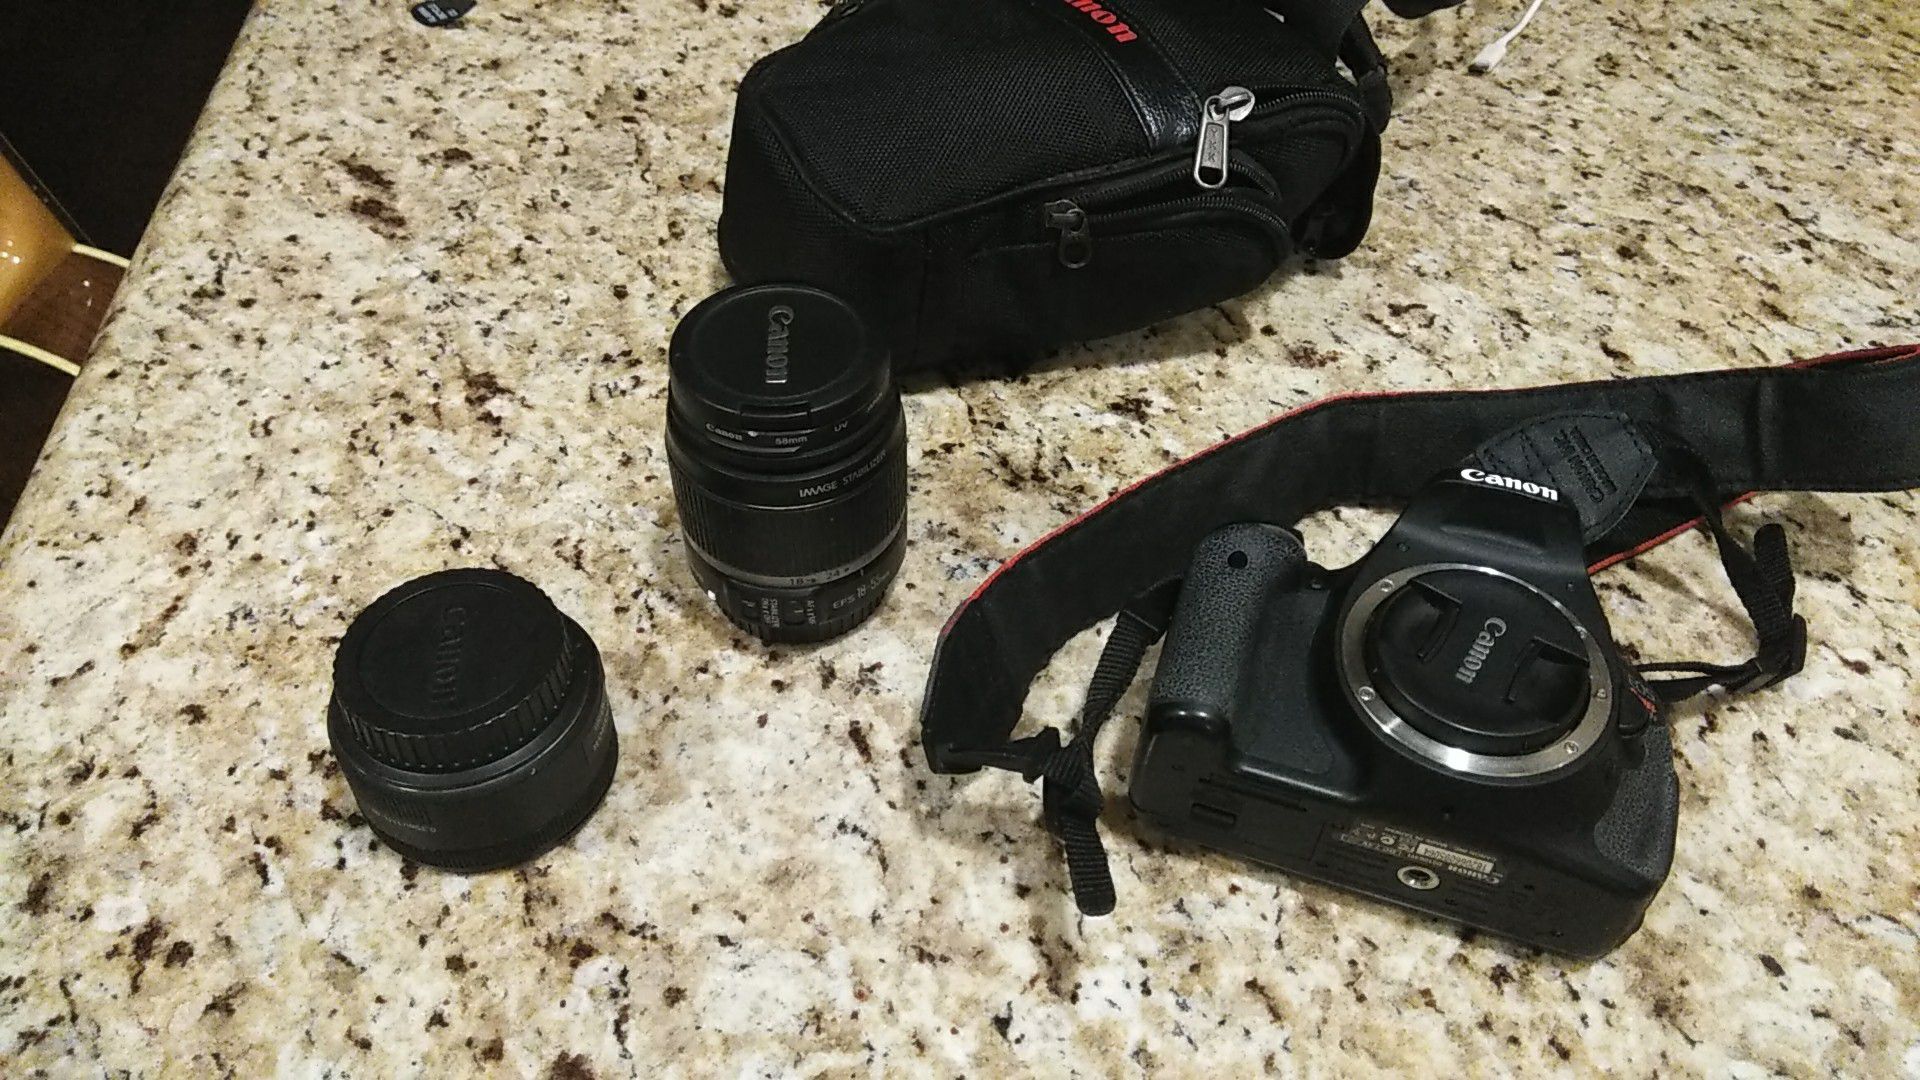 Canon rebel t3i with lenses